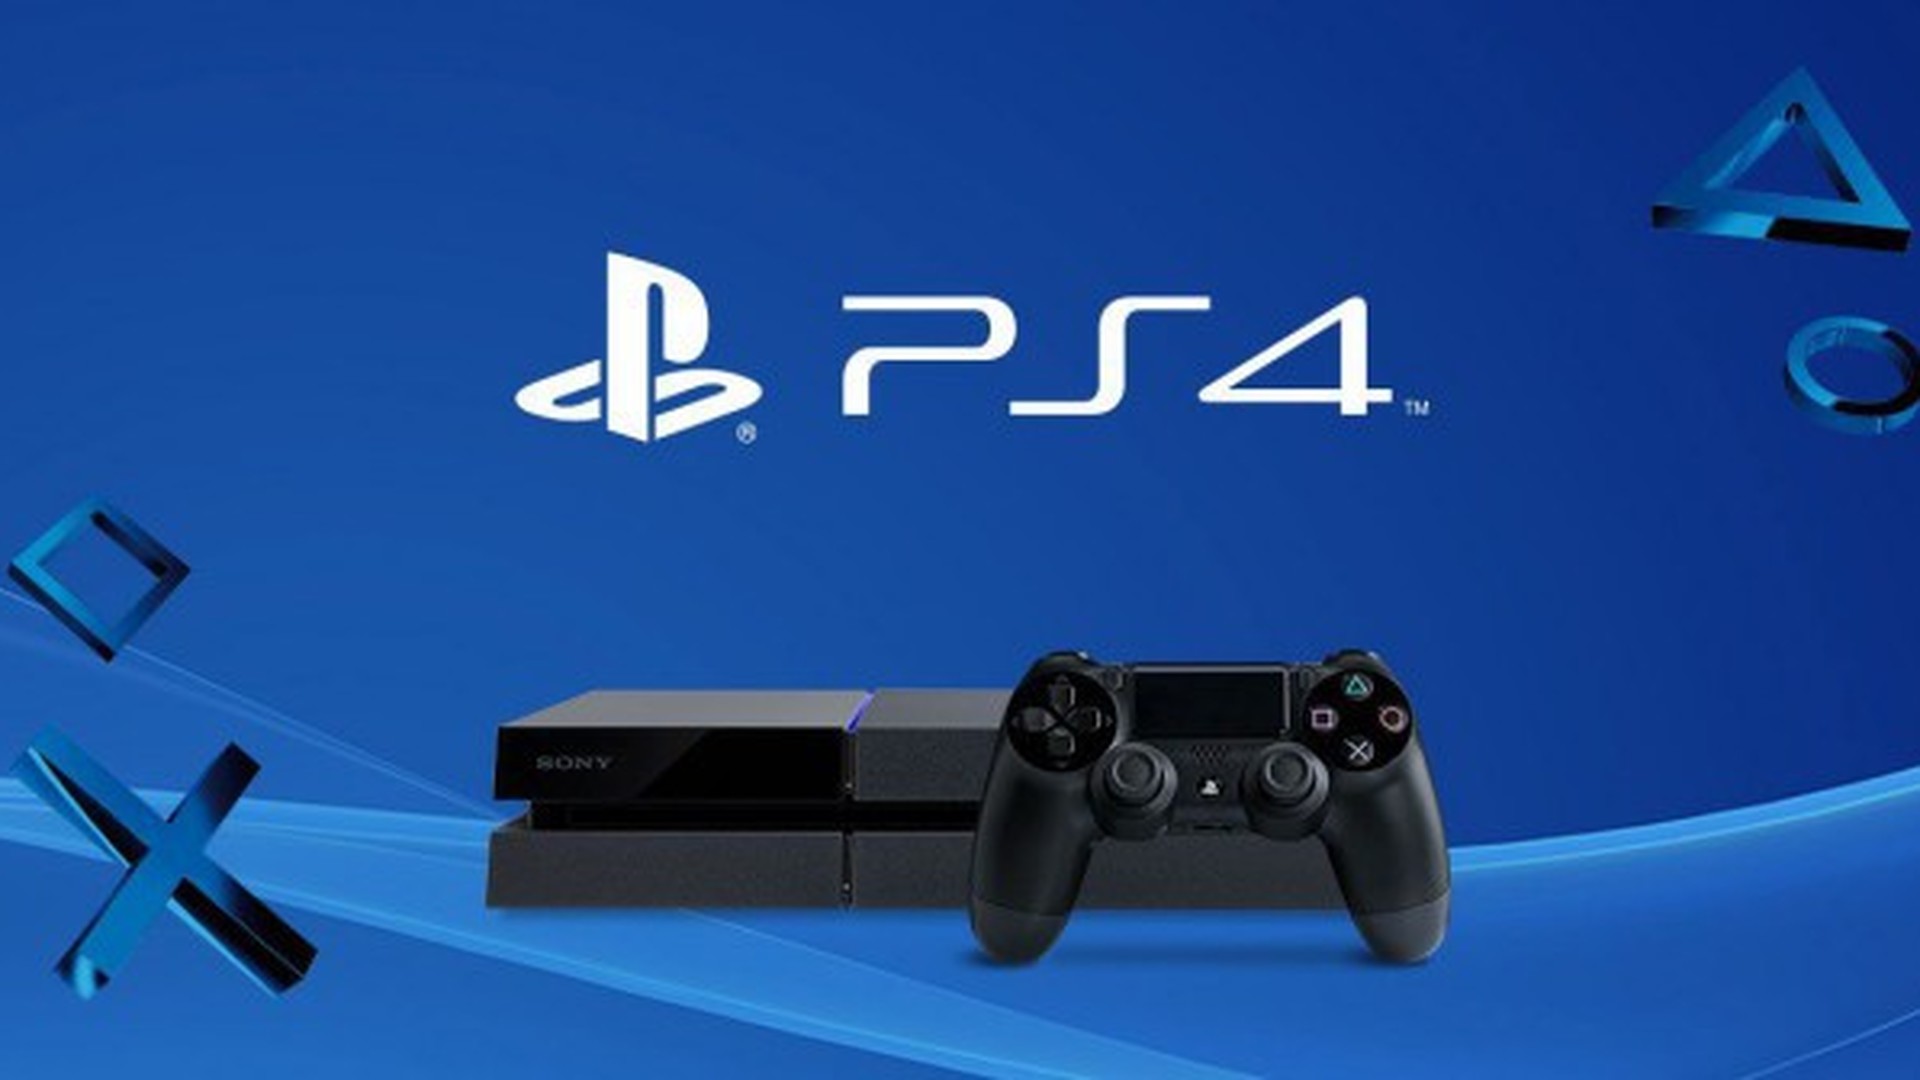 Ps4 общее. Сони ПС 5. Сони ПС 4. Sony PLAYSTATION 4 игры. Sony Front ps4.